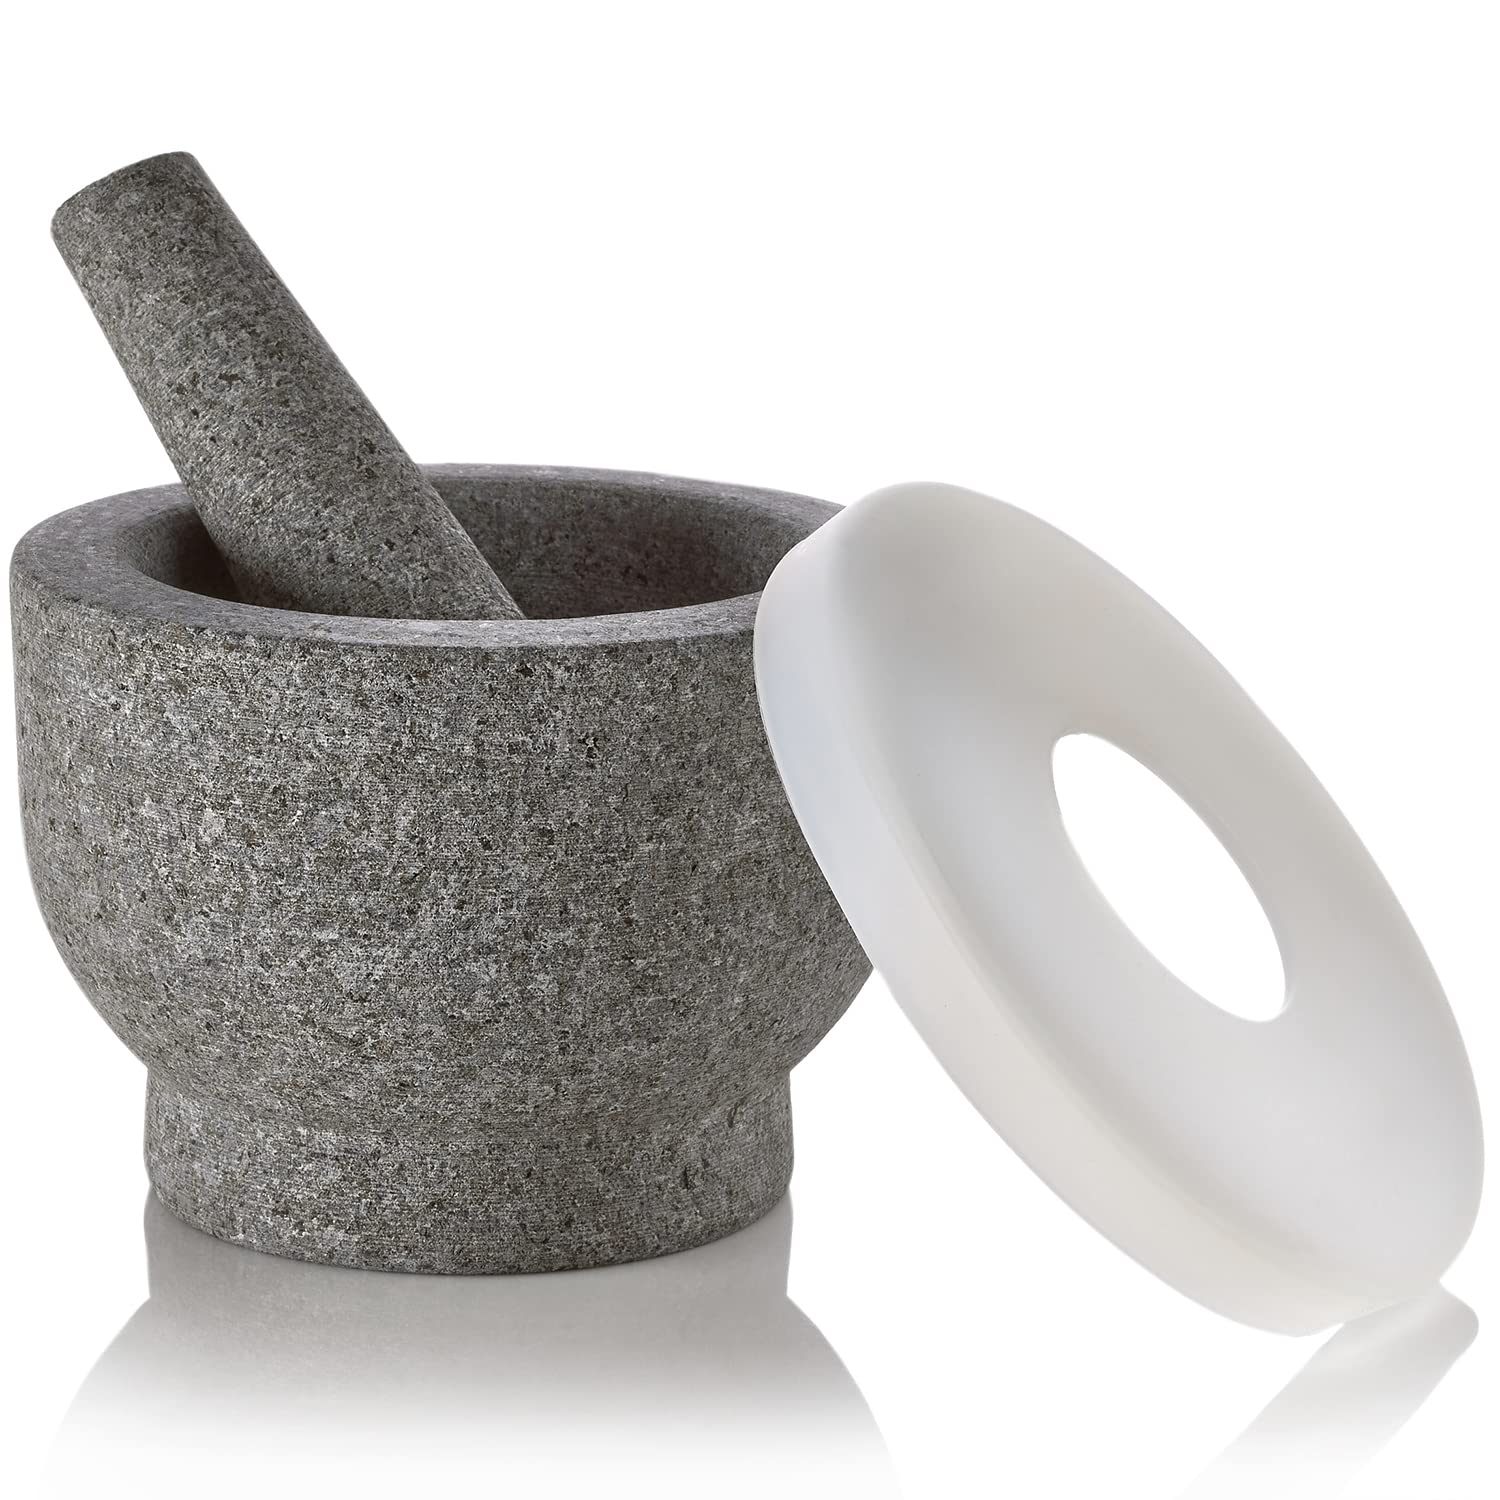 Granite Mortar and Pestle Pill Crusher Set - Easy Grip Non-Slip Stone Muddler & Deep Bowl with Silicone Lid - Grinder for Pills, Tablets, Vitamins or as Molcajete Herb for Salsa